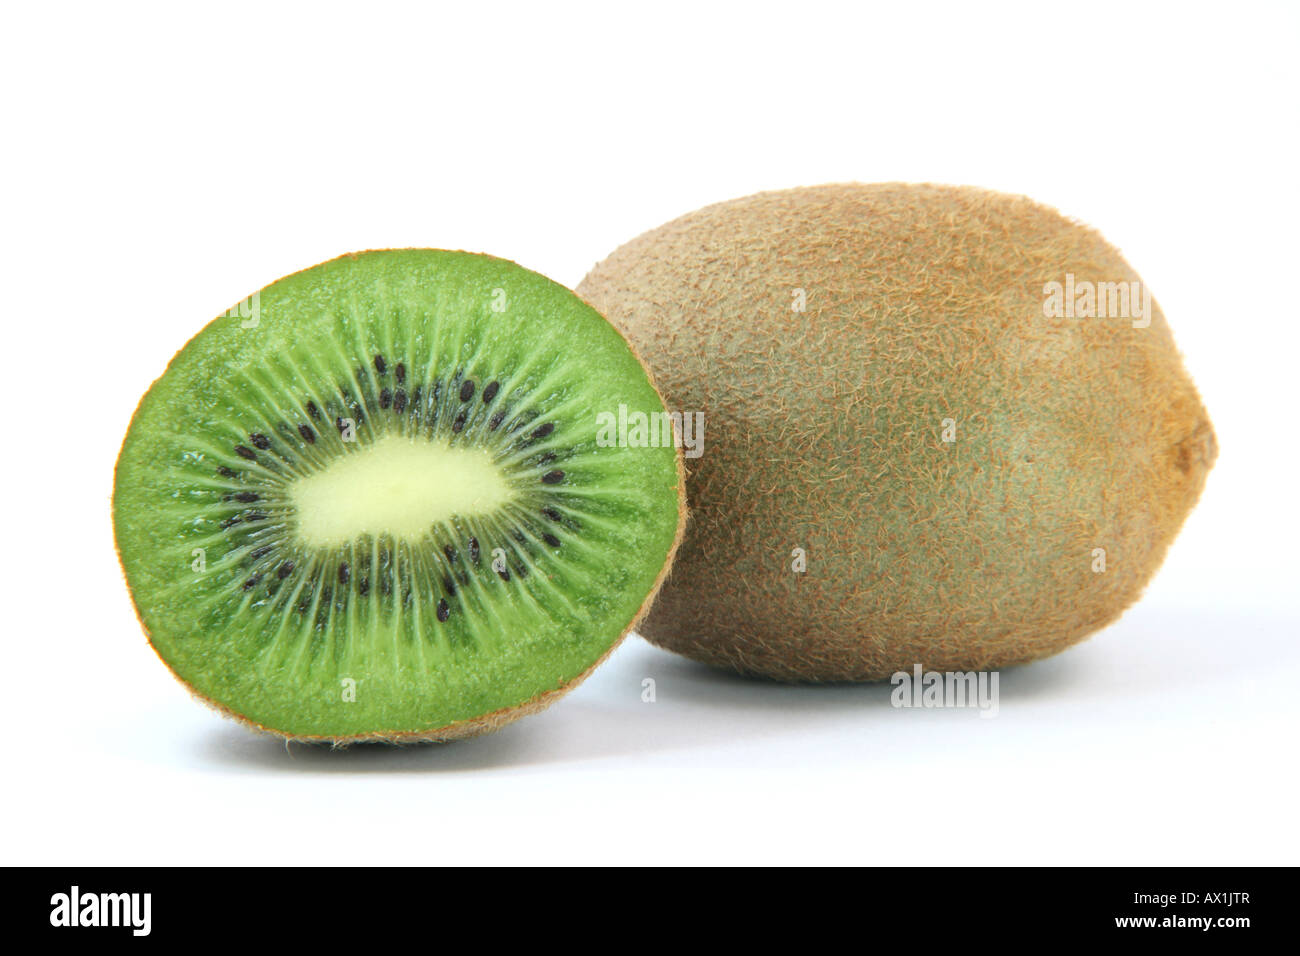 hole and half kiwi fruit isolated on white background healthy eating and agriculture concepts Stock Photo